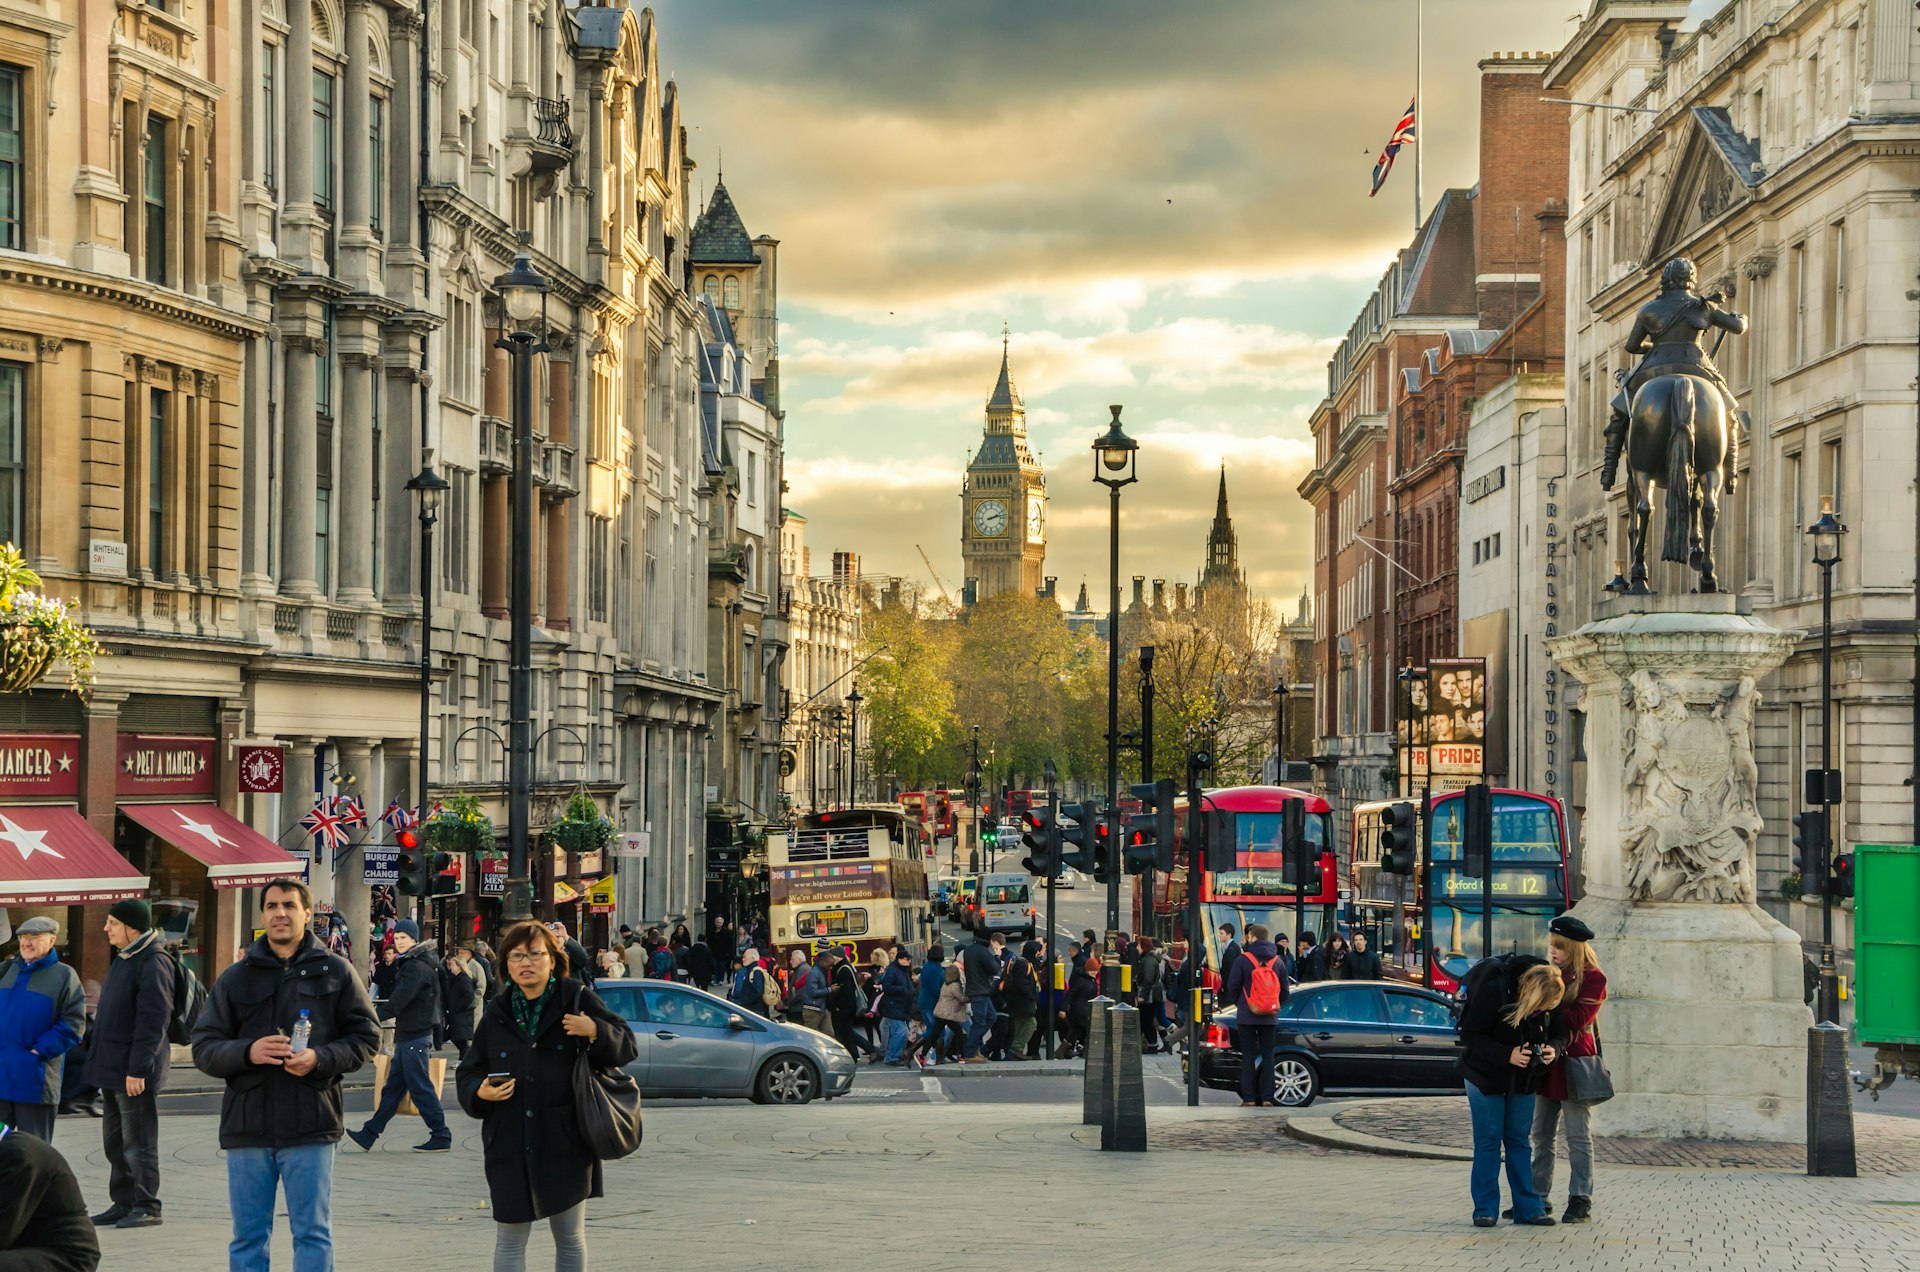 London's Whitehall Street at sunset, crowded with tourists and commuters